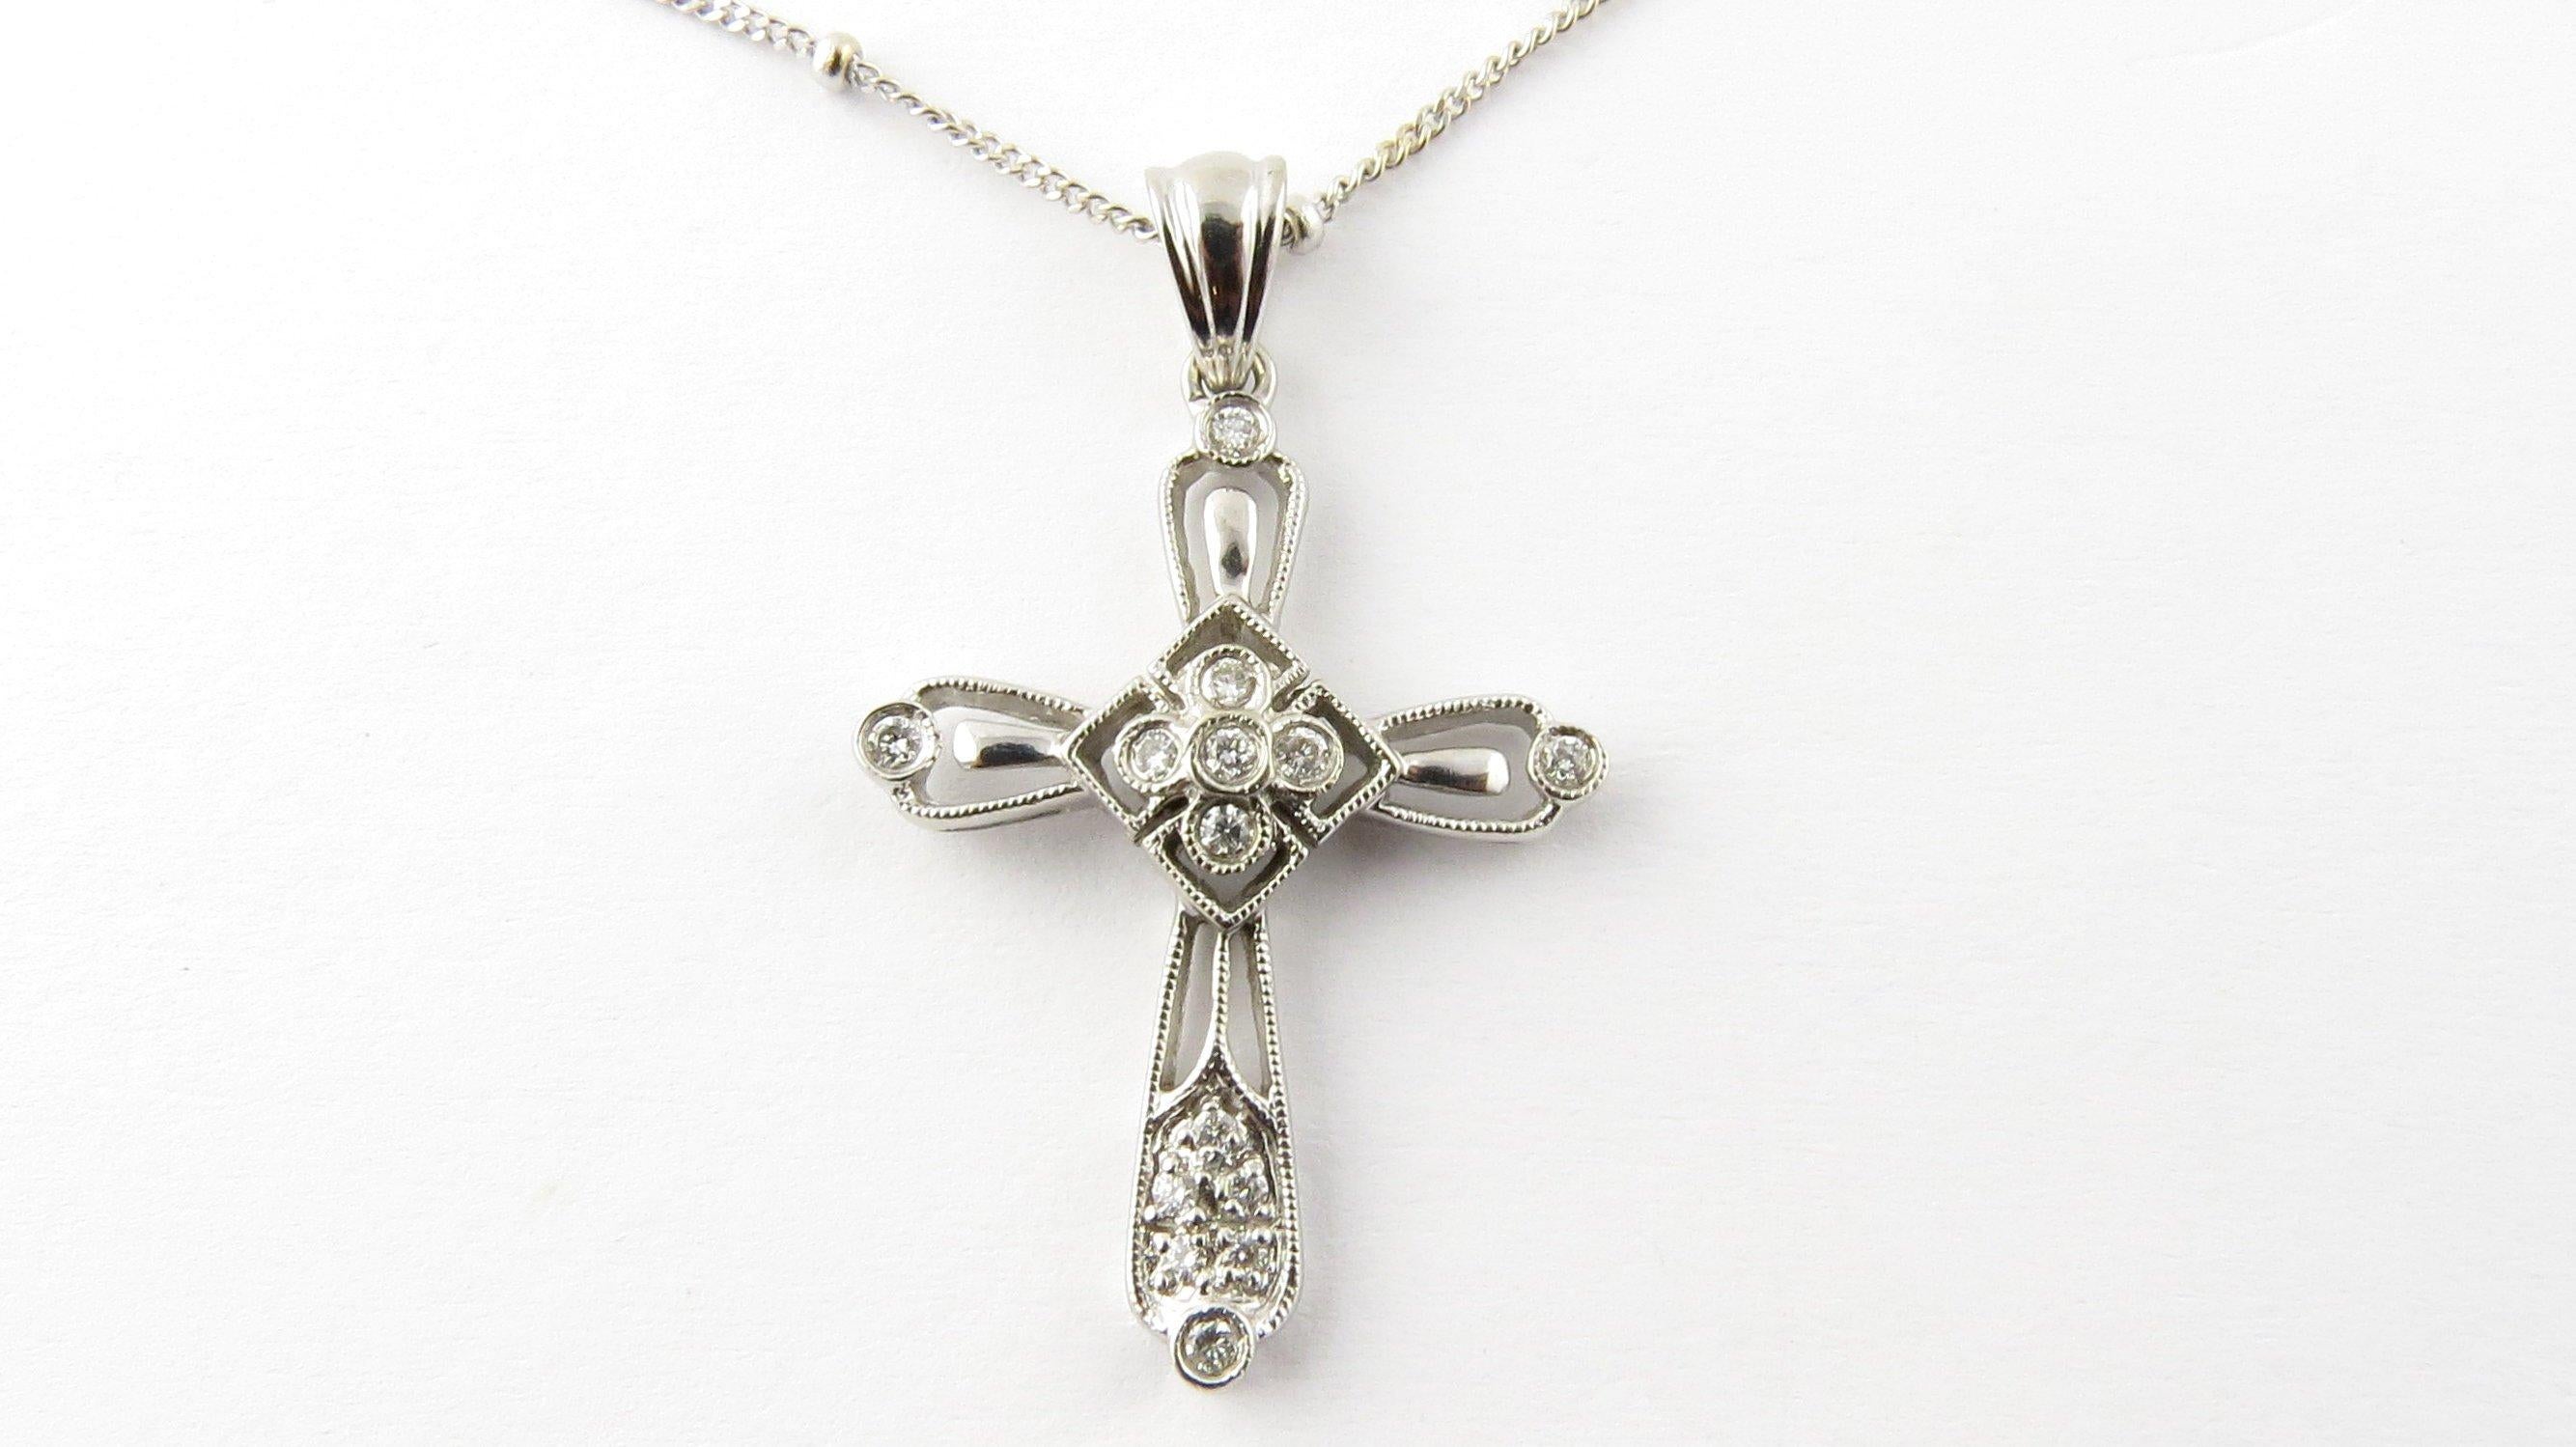 Vintage 14 Karat White Gold Diamond Cross Pendant Necklace- 
This sparkling diamond cross pendant features 14 round brilliant cut diamonds set in stunning 14K white gold. Suspended from lovely beaded 14K white gold necklace. 
Approximated total